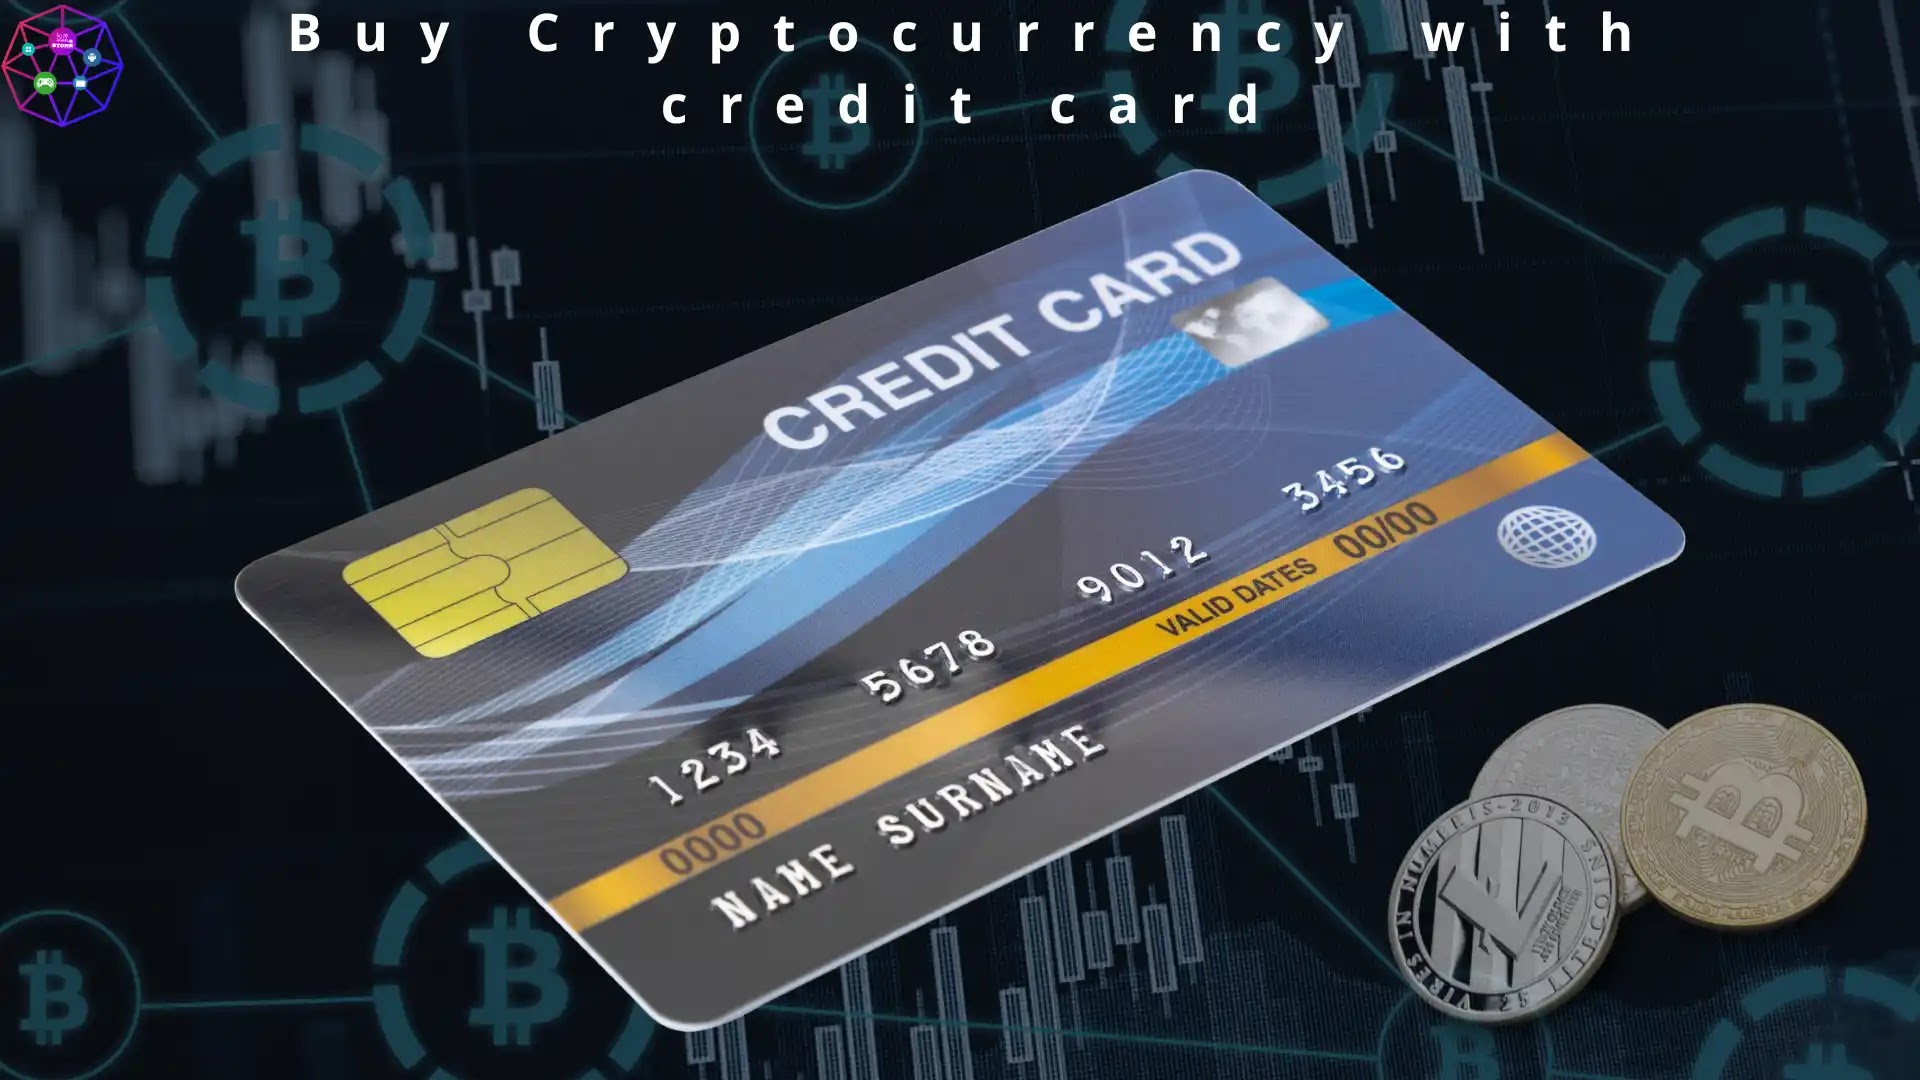 Buy Cryptocurrency with credit card